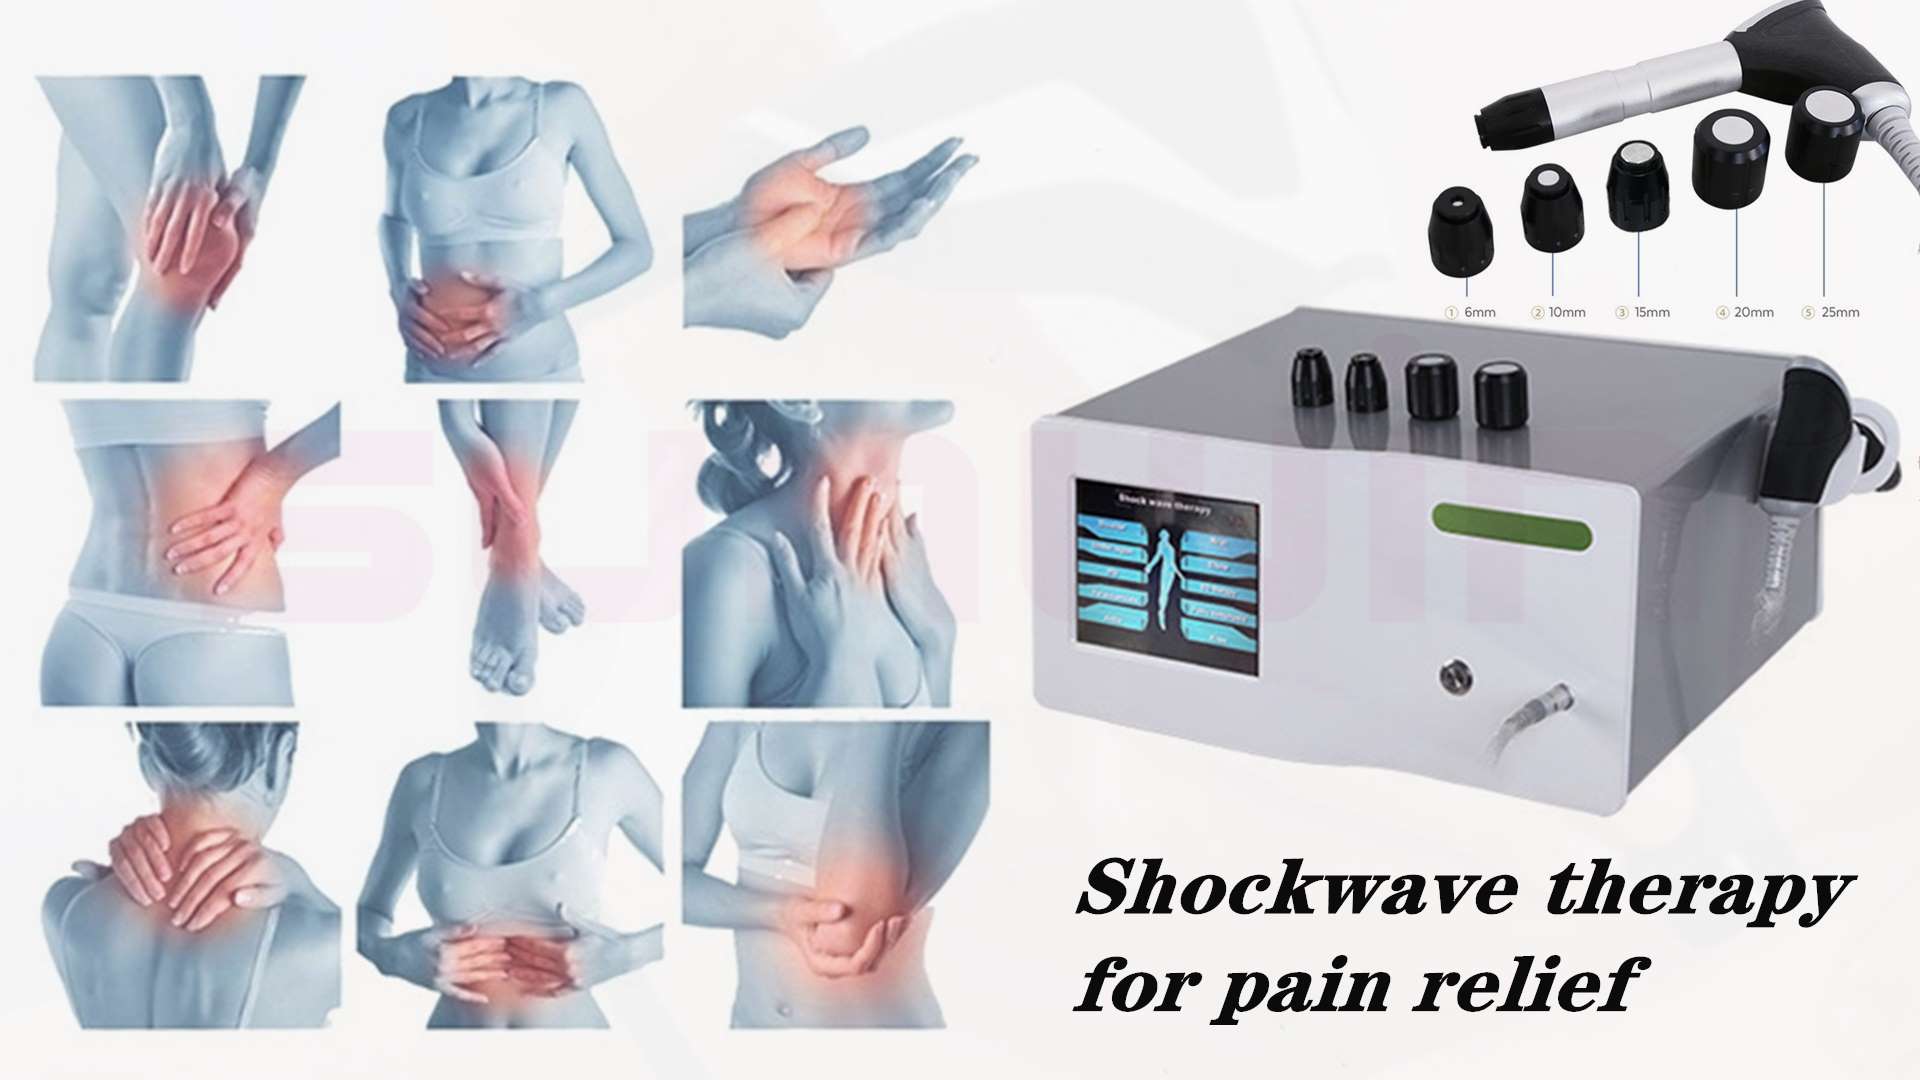 painless shock wave therapy equipment body pain relief shockwave ED physcial